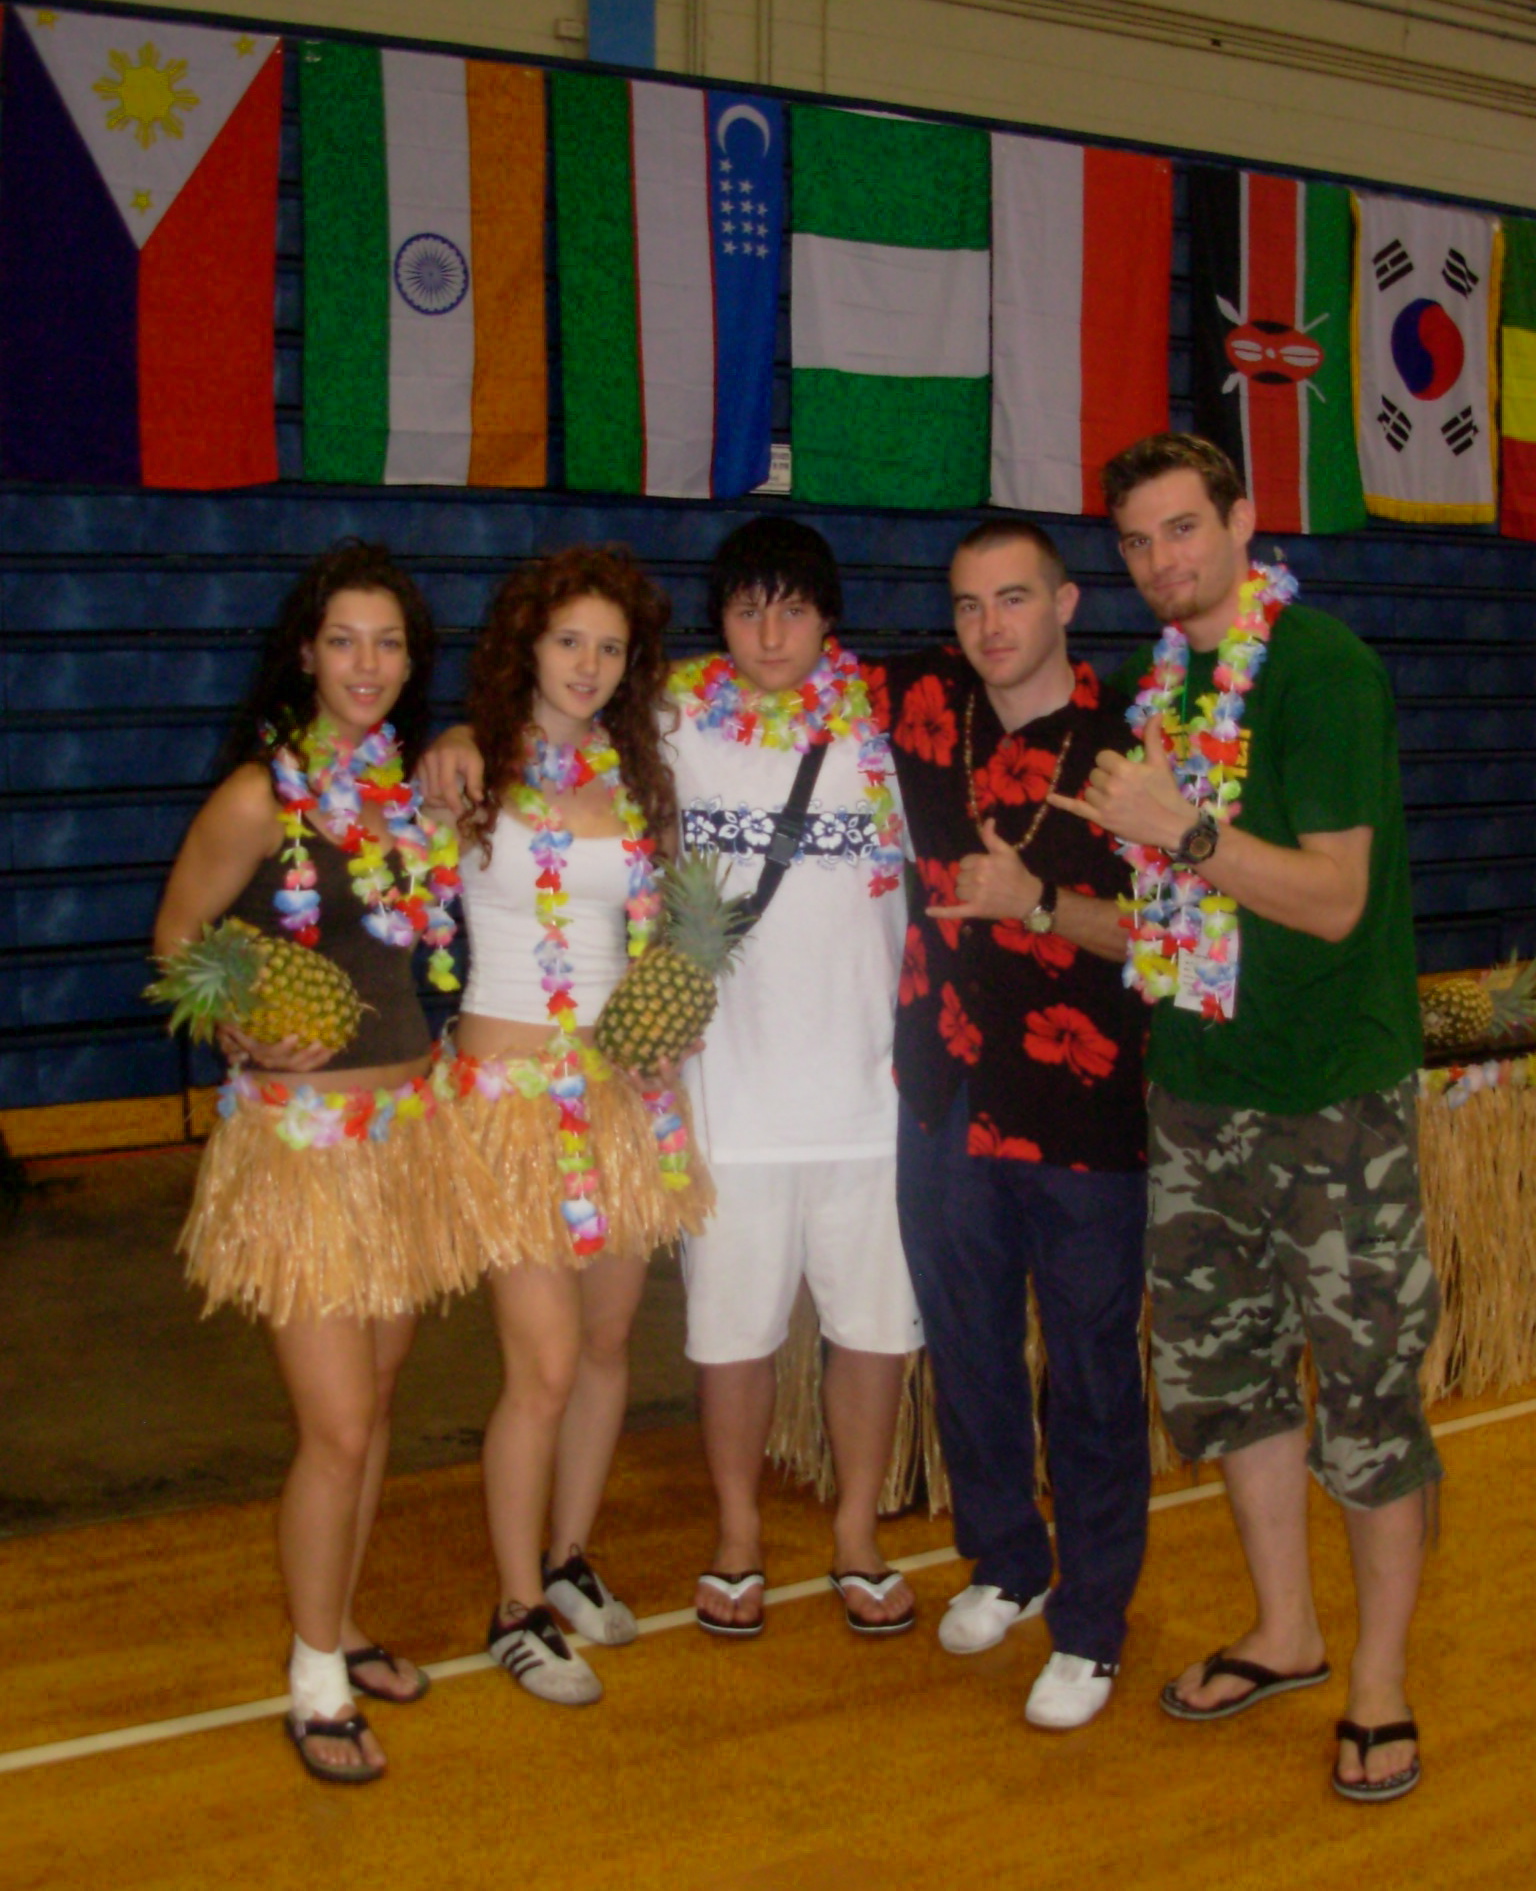 Teams from Austria and Croatia at the Maui Open